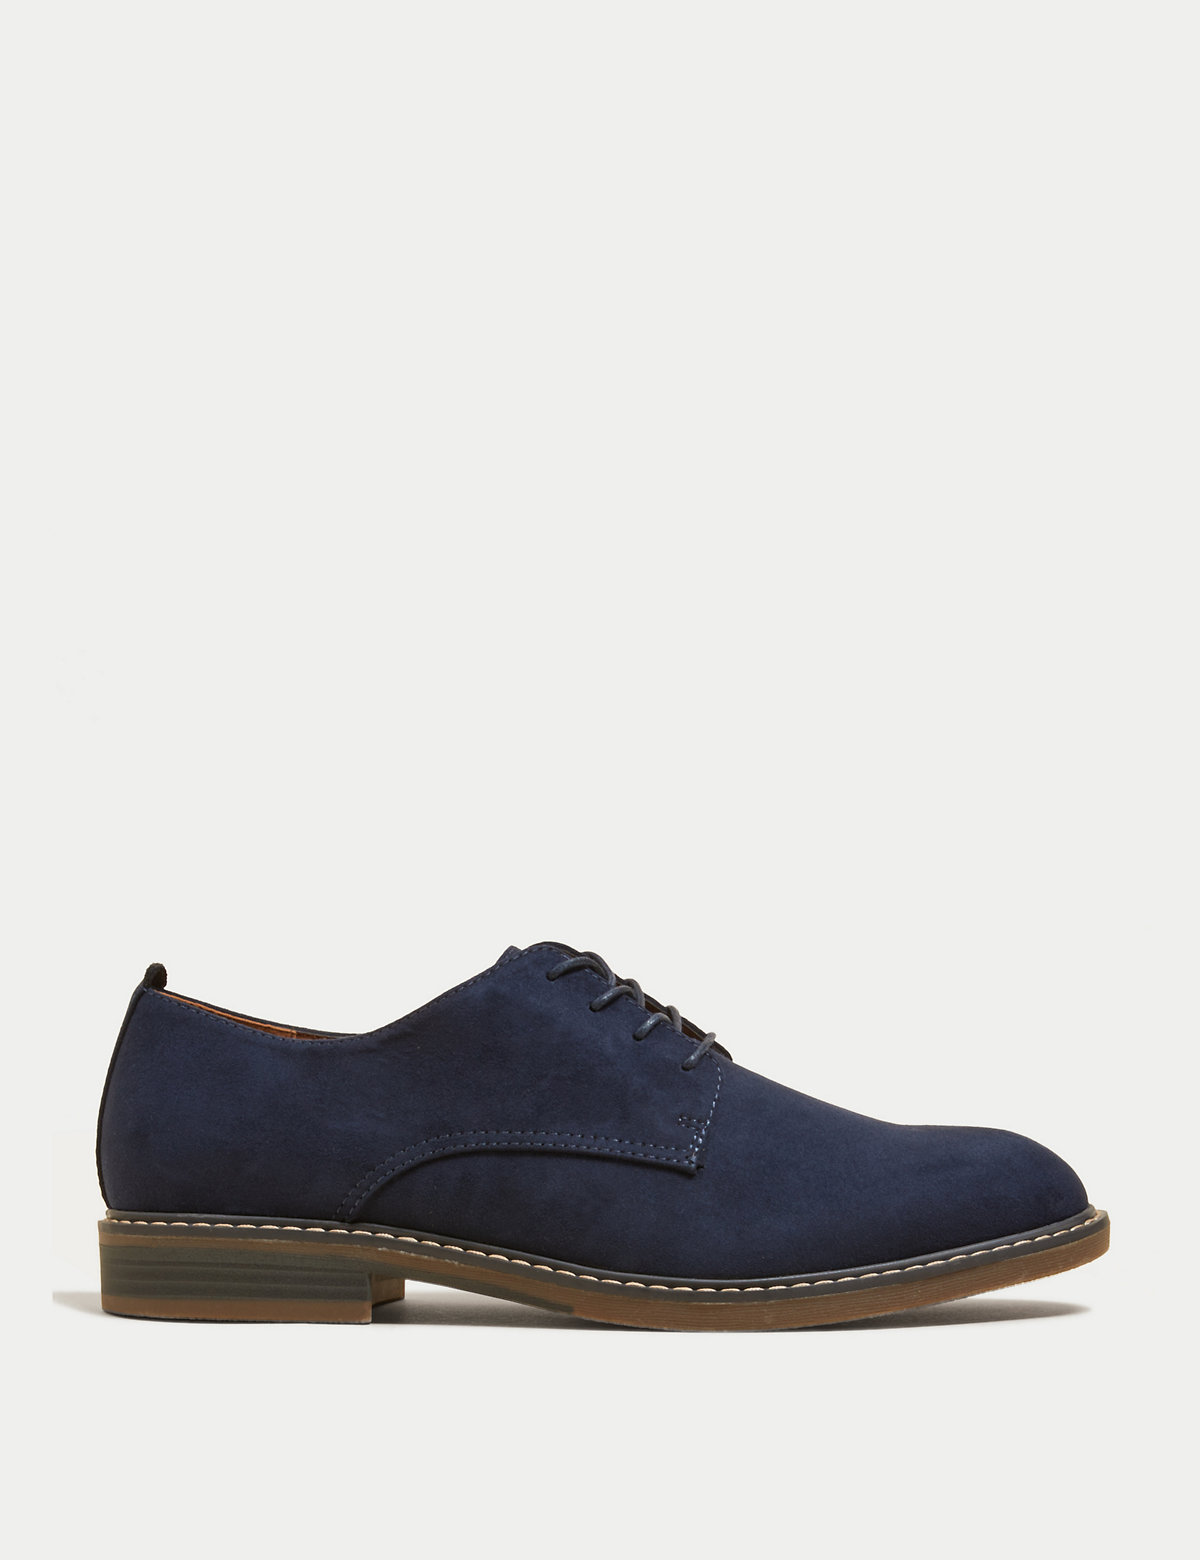 

Marks & Spencer Suedette Derby Shoes (MALE, NAVY, 7)